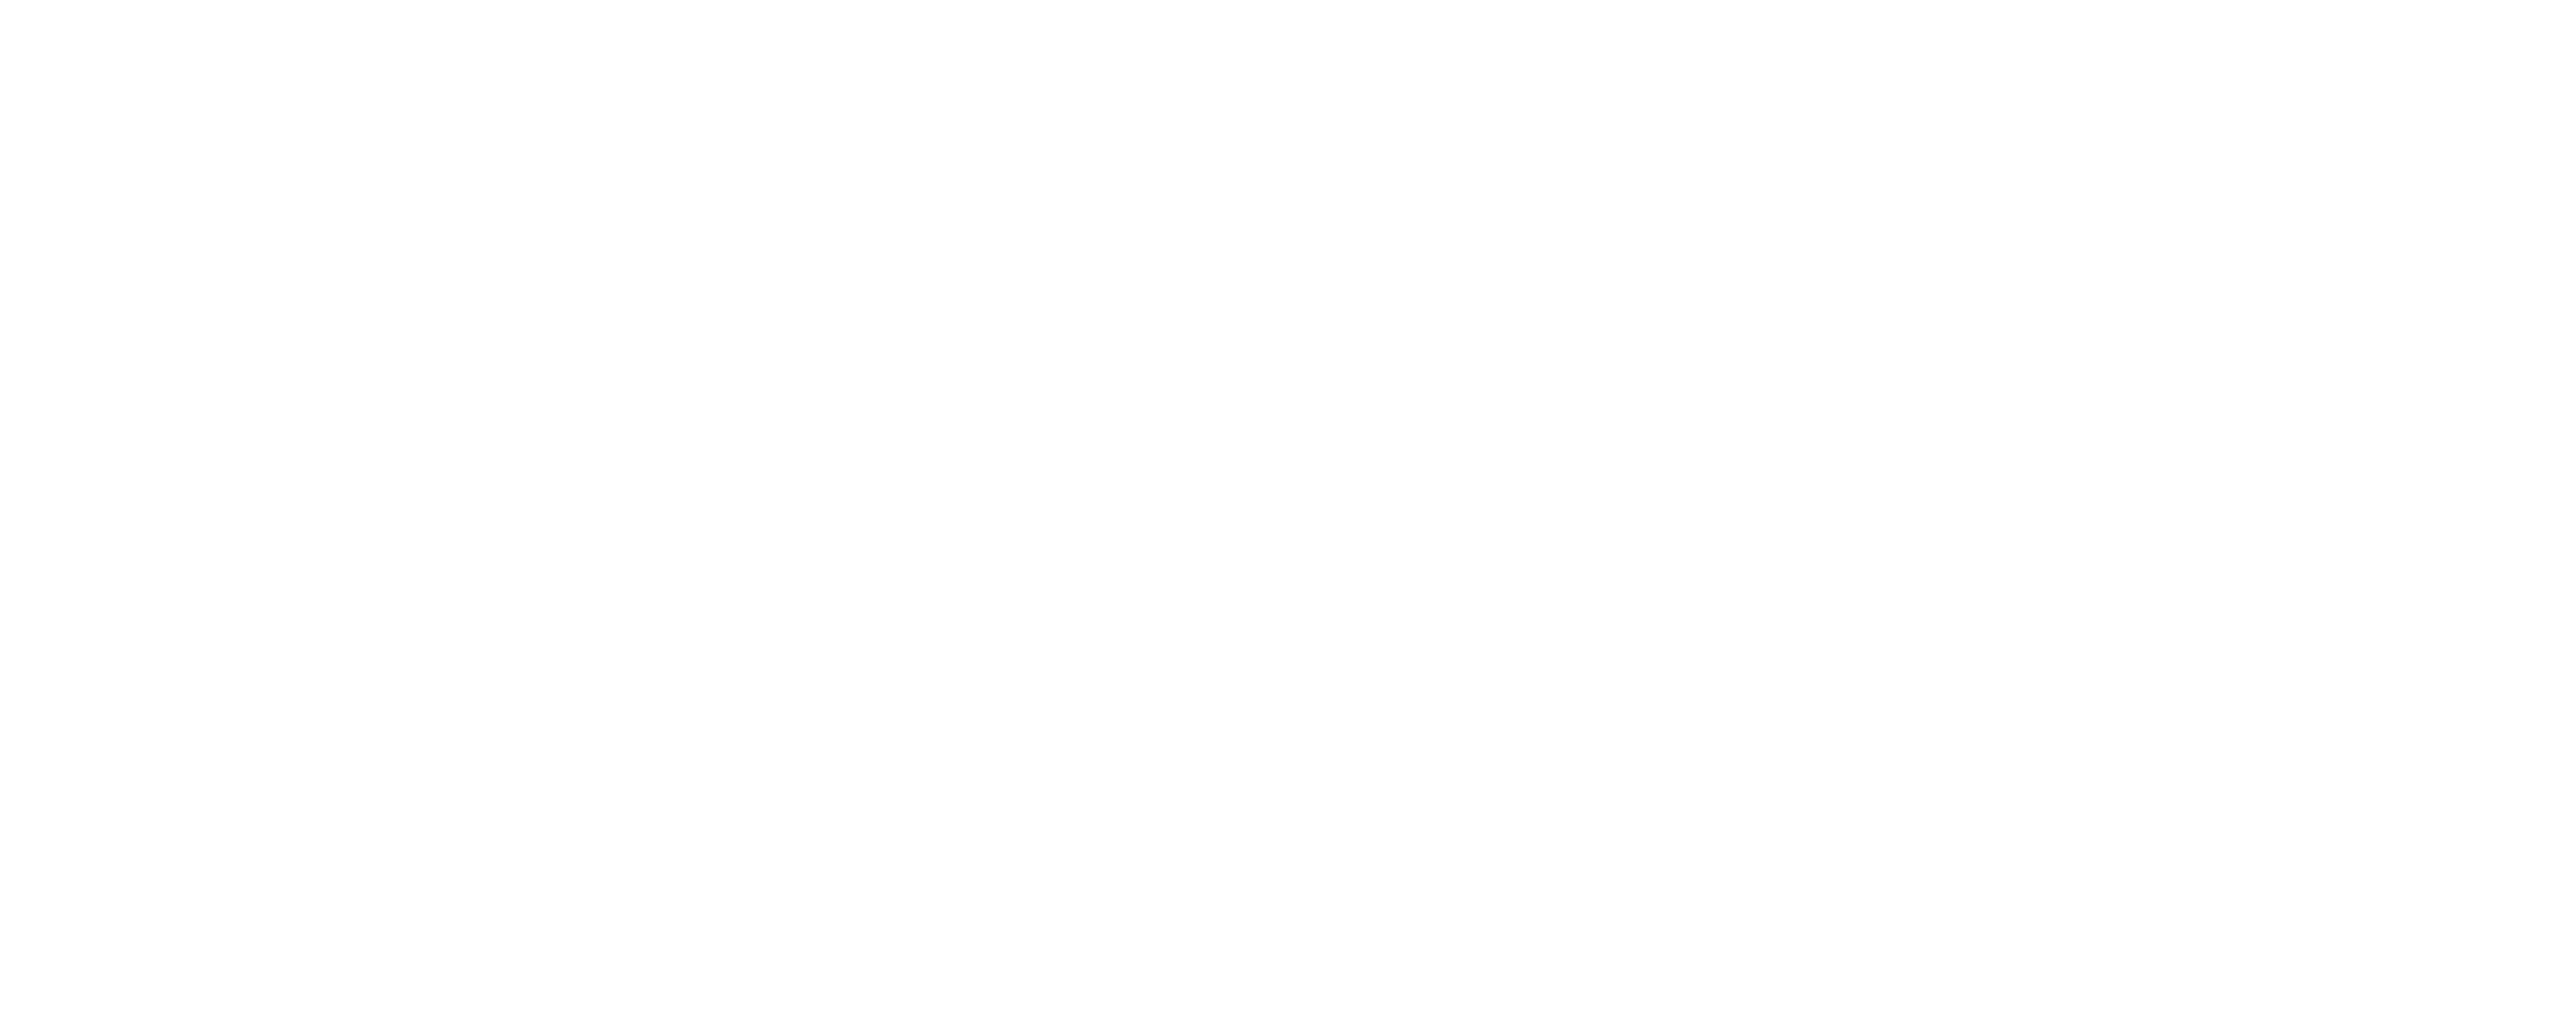 Craig Smith Professional Session Musician - home page